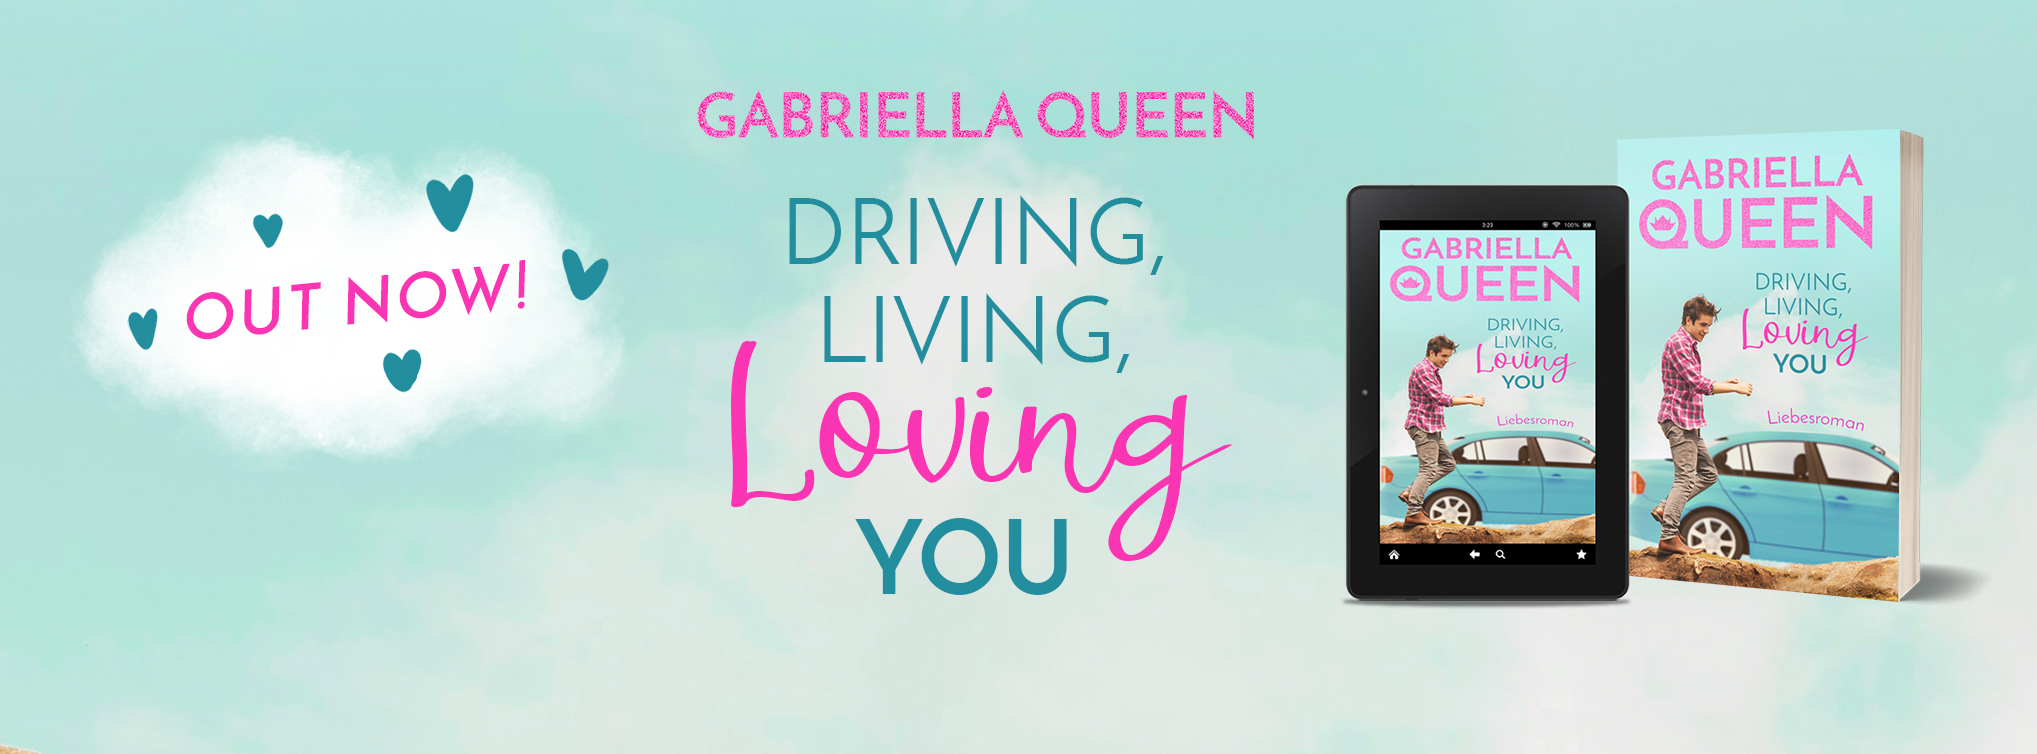 Web Banner Out Now Driving, Living, Loving You von Gabriella Queen